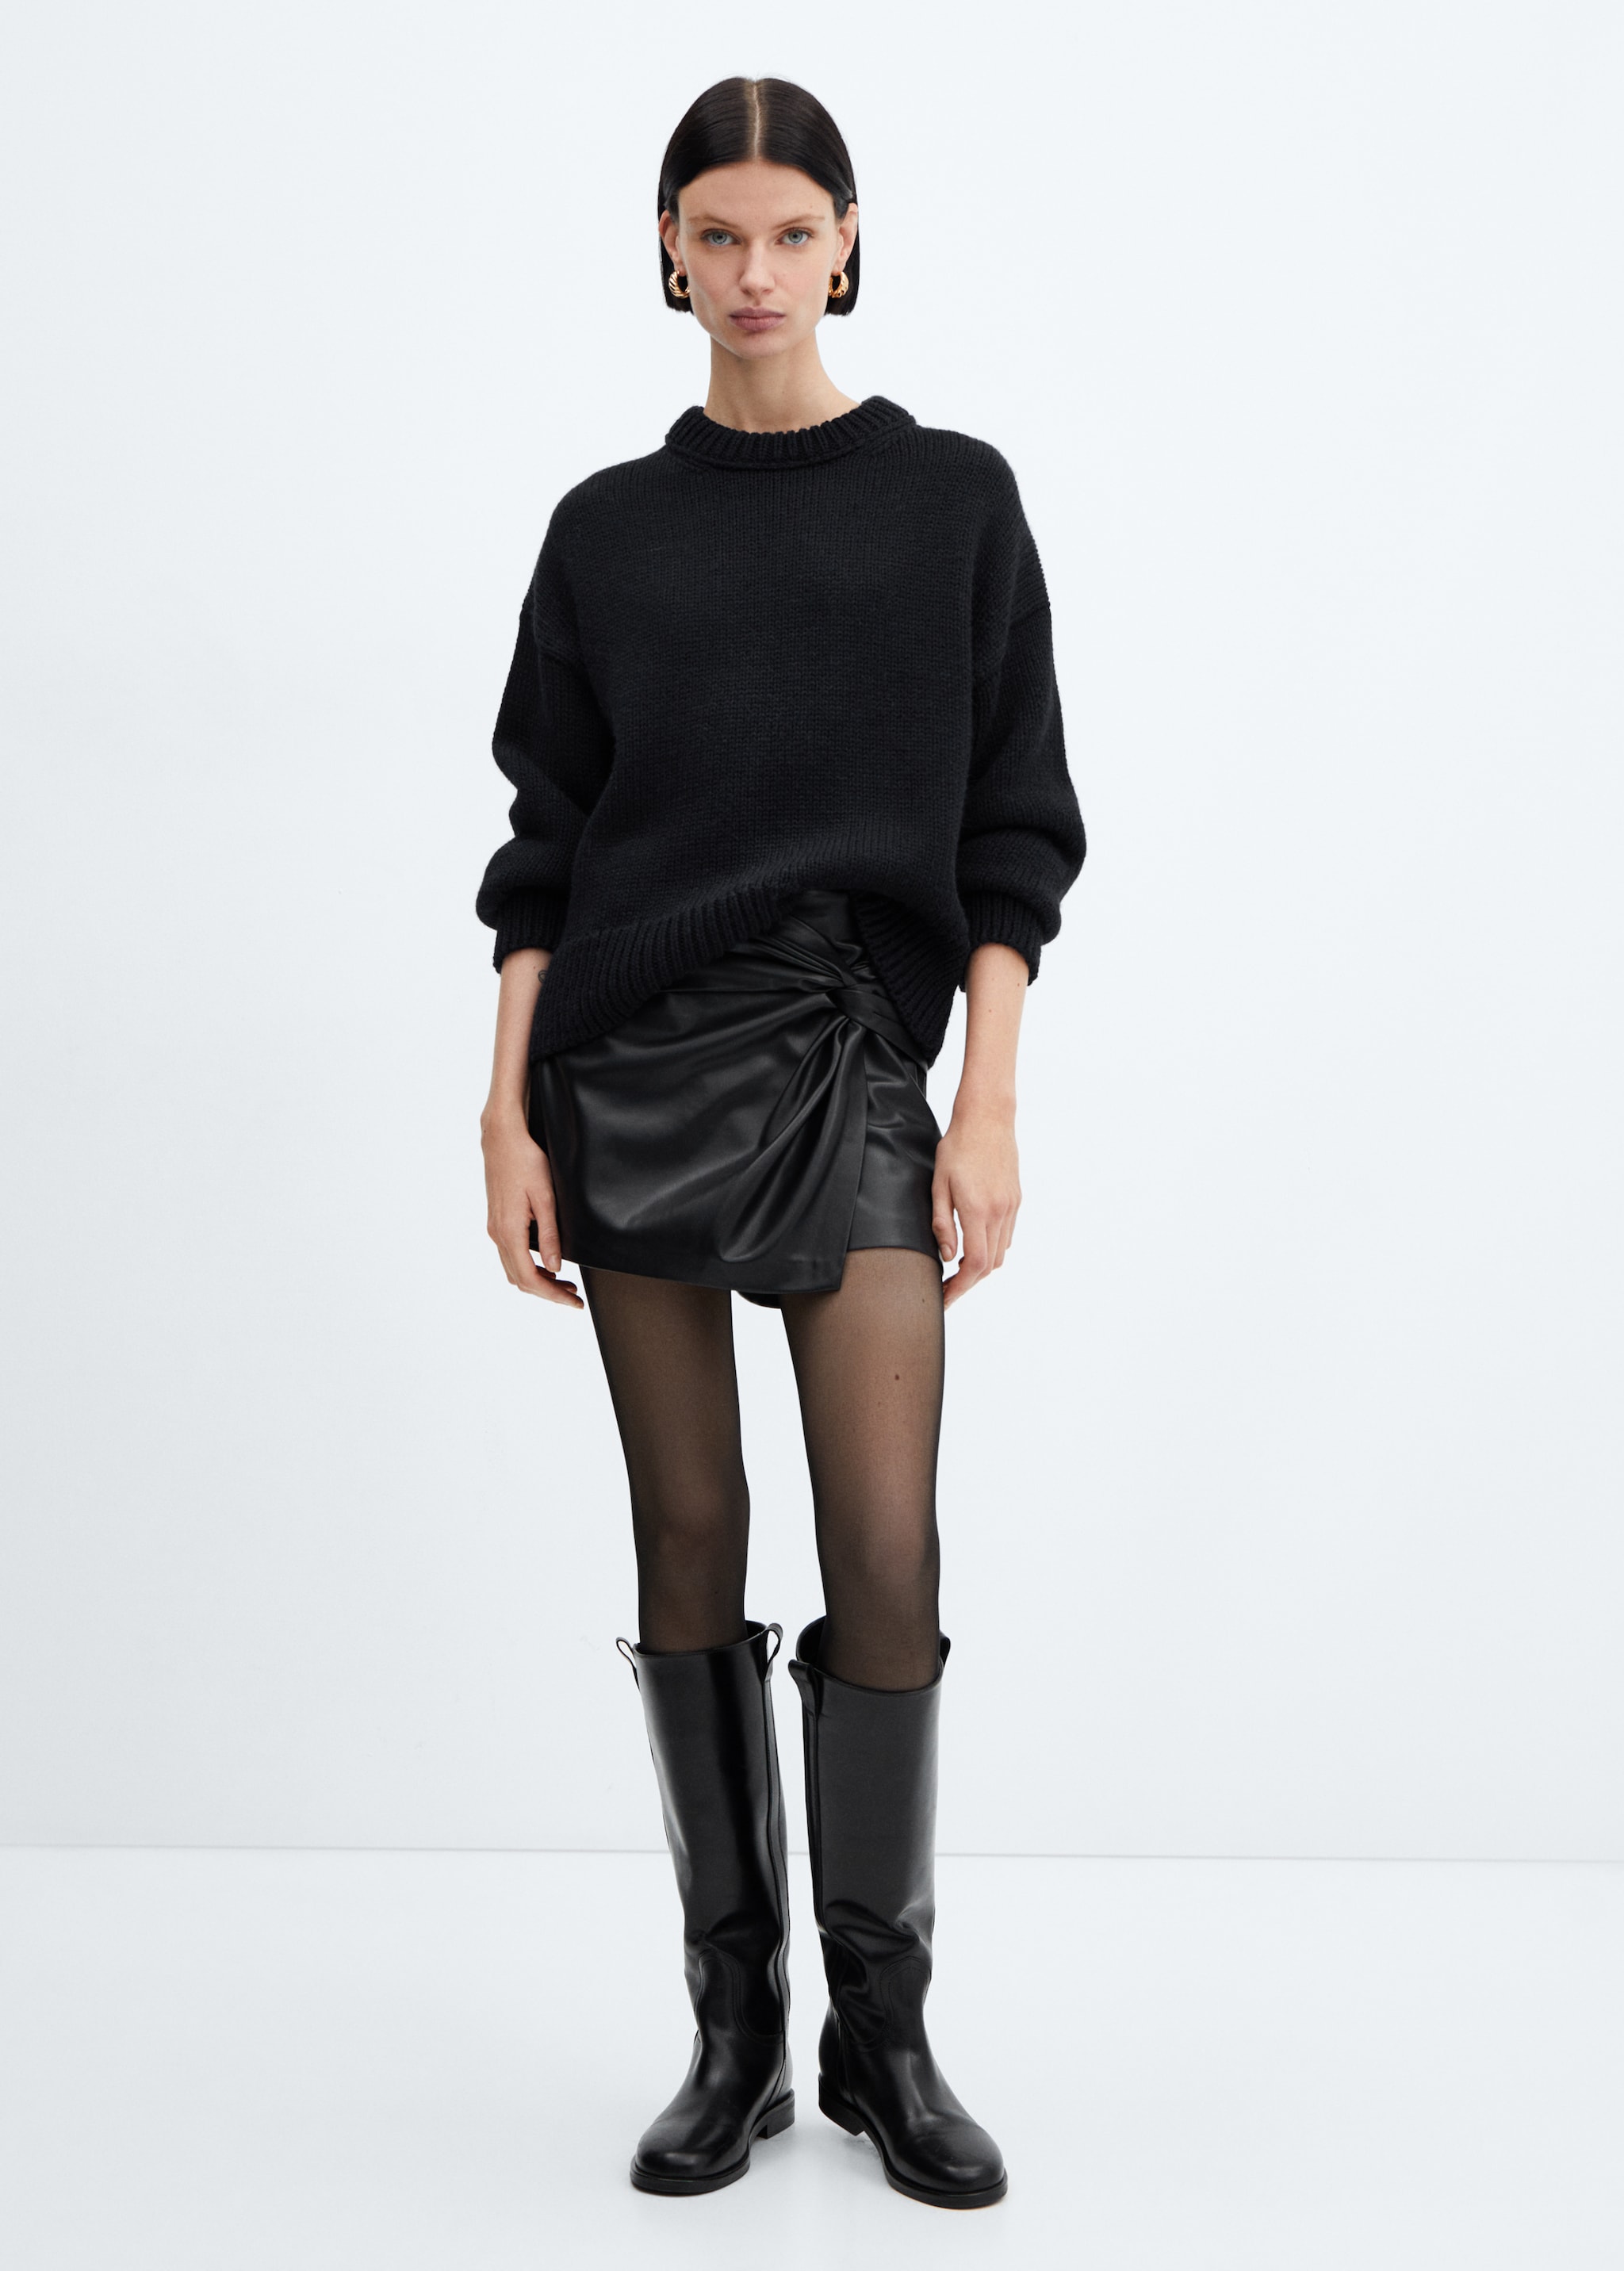 Leather-effect culottes - General plane